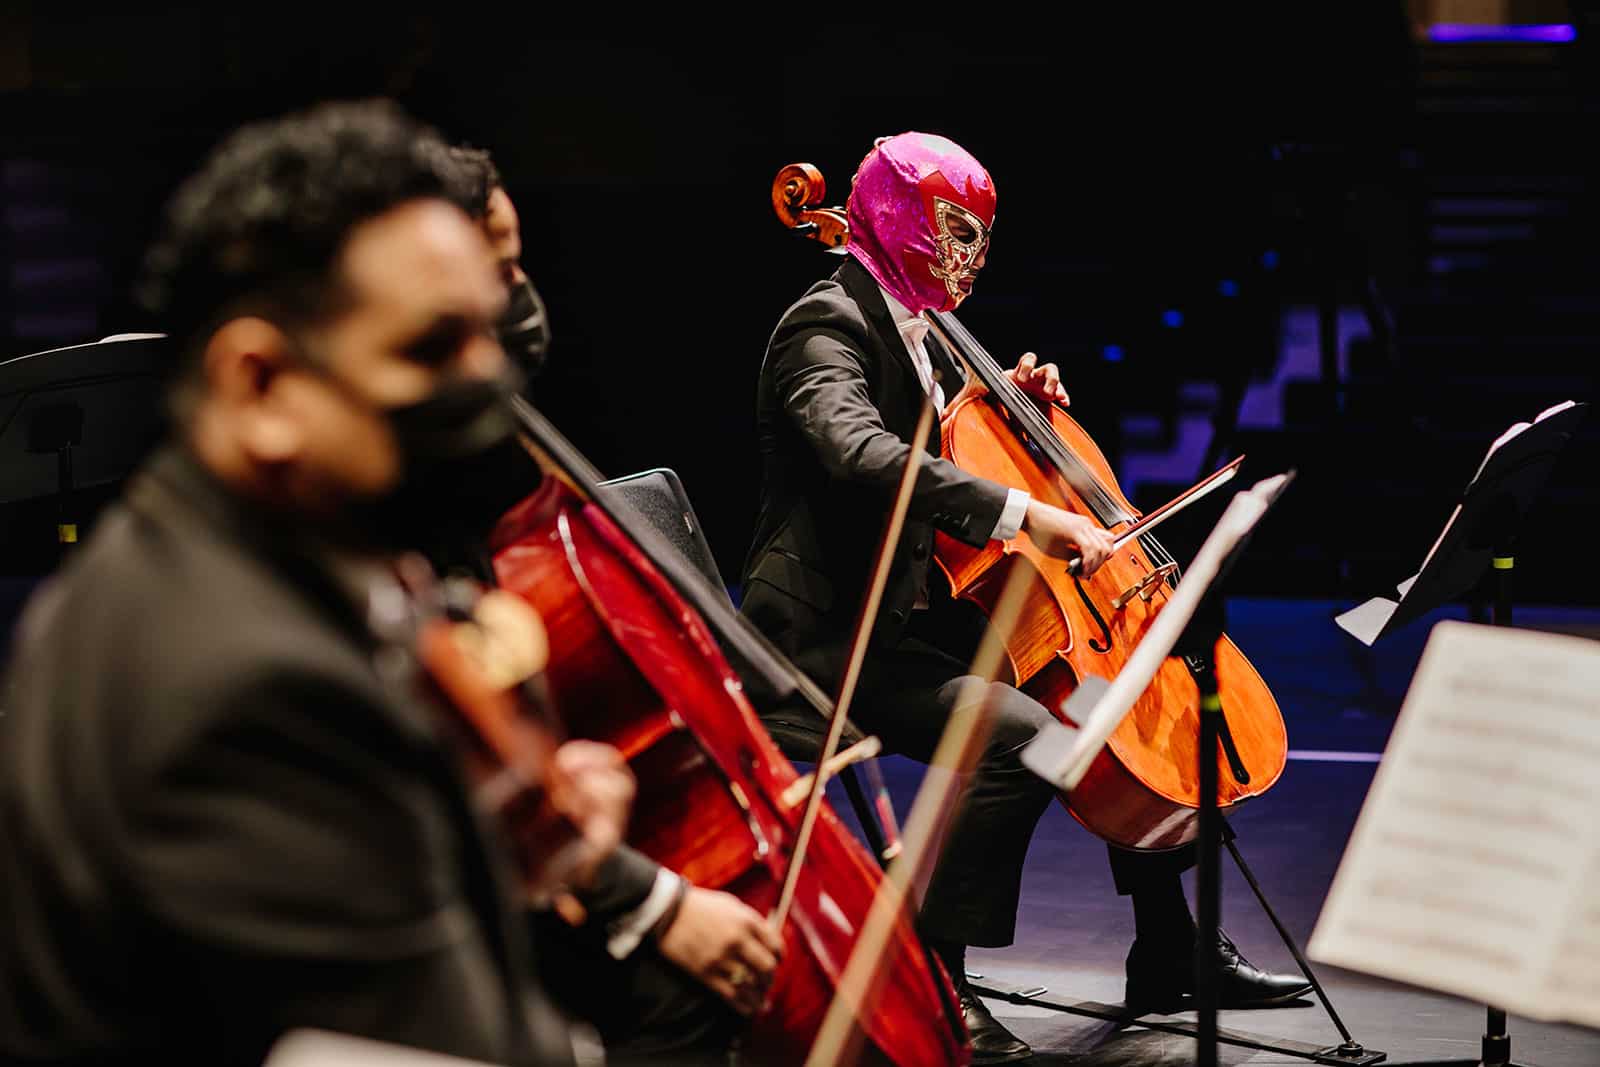 Row of cellists, one wearing a bright pink luchador mask